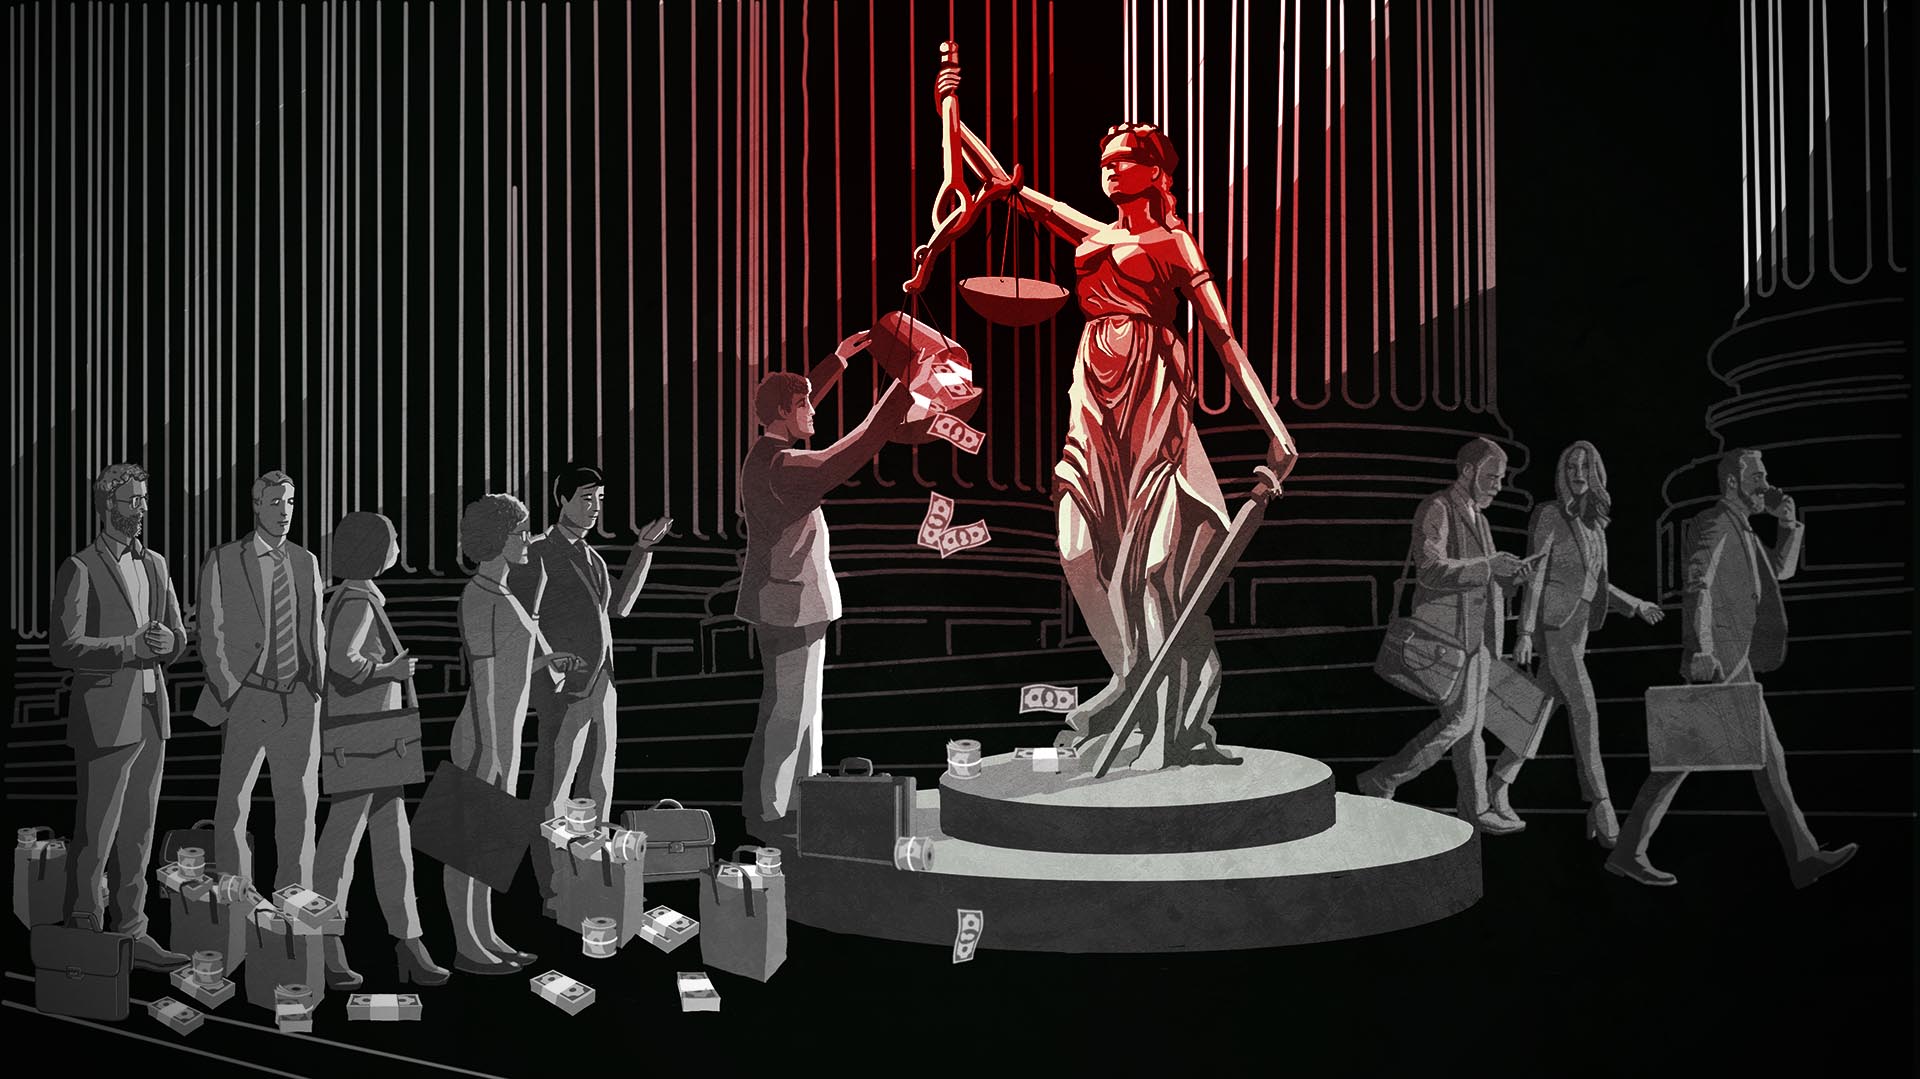 Illustration of Lady Justice accepting cash from businesspeople